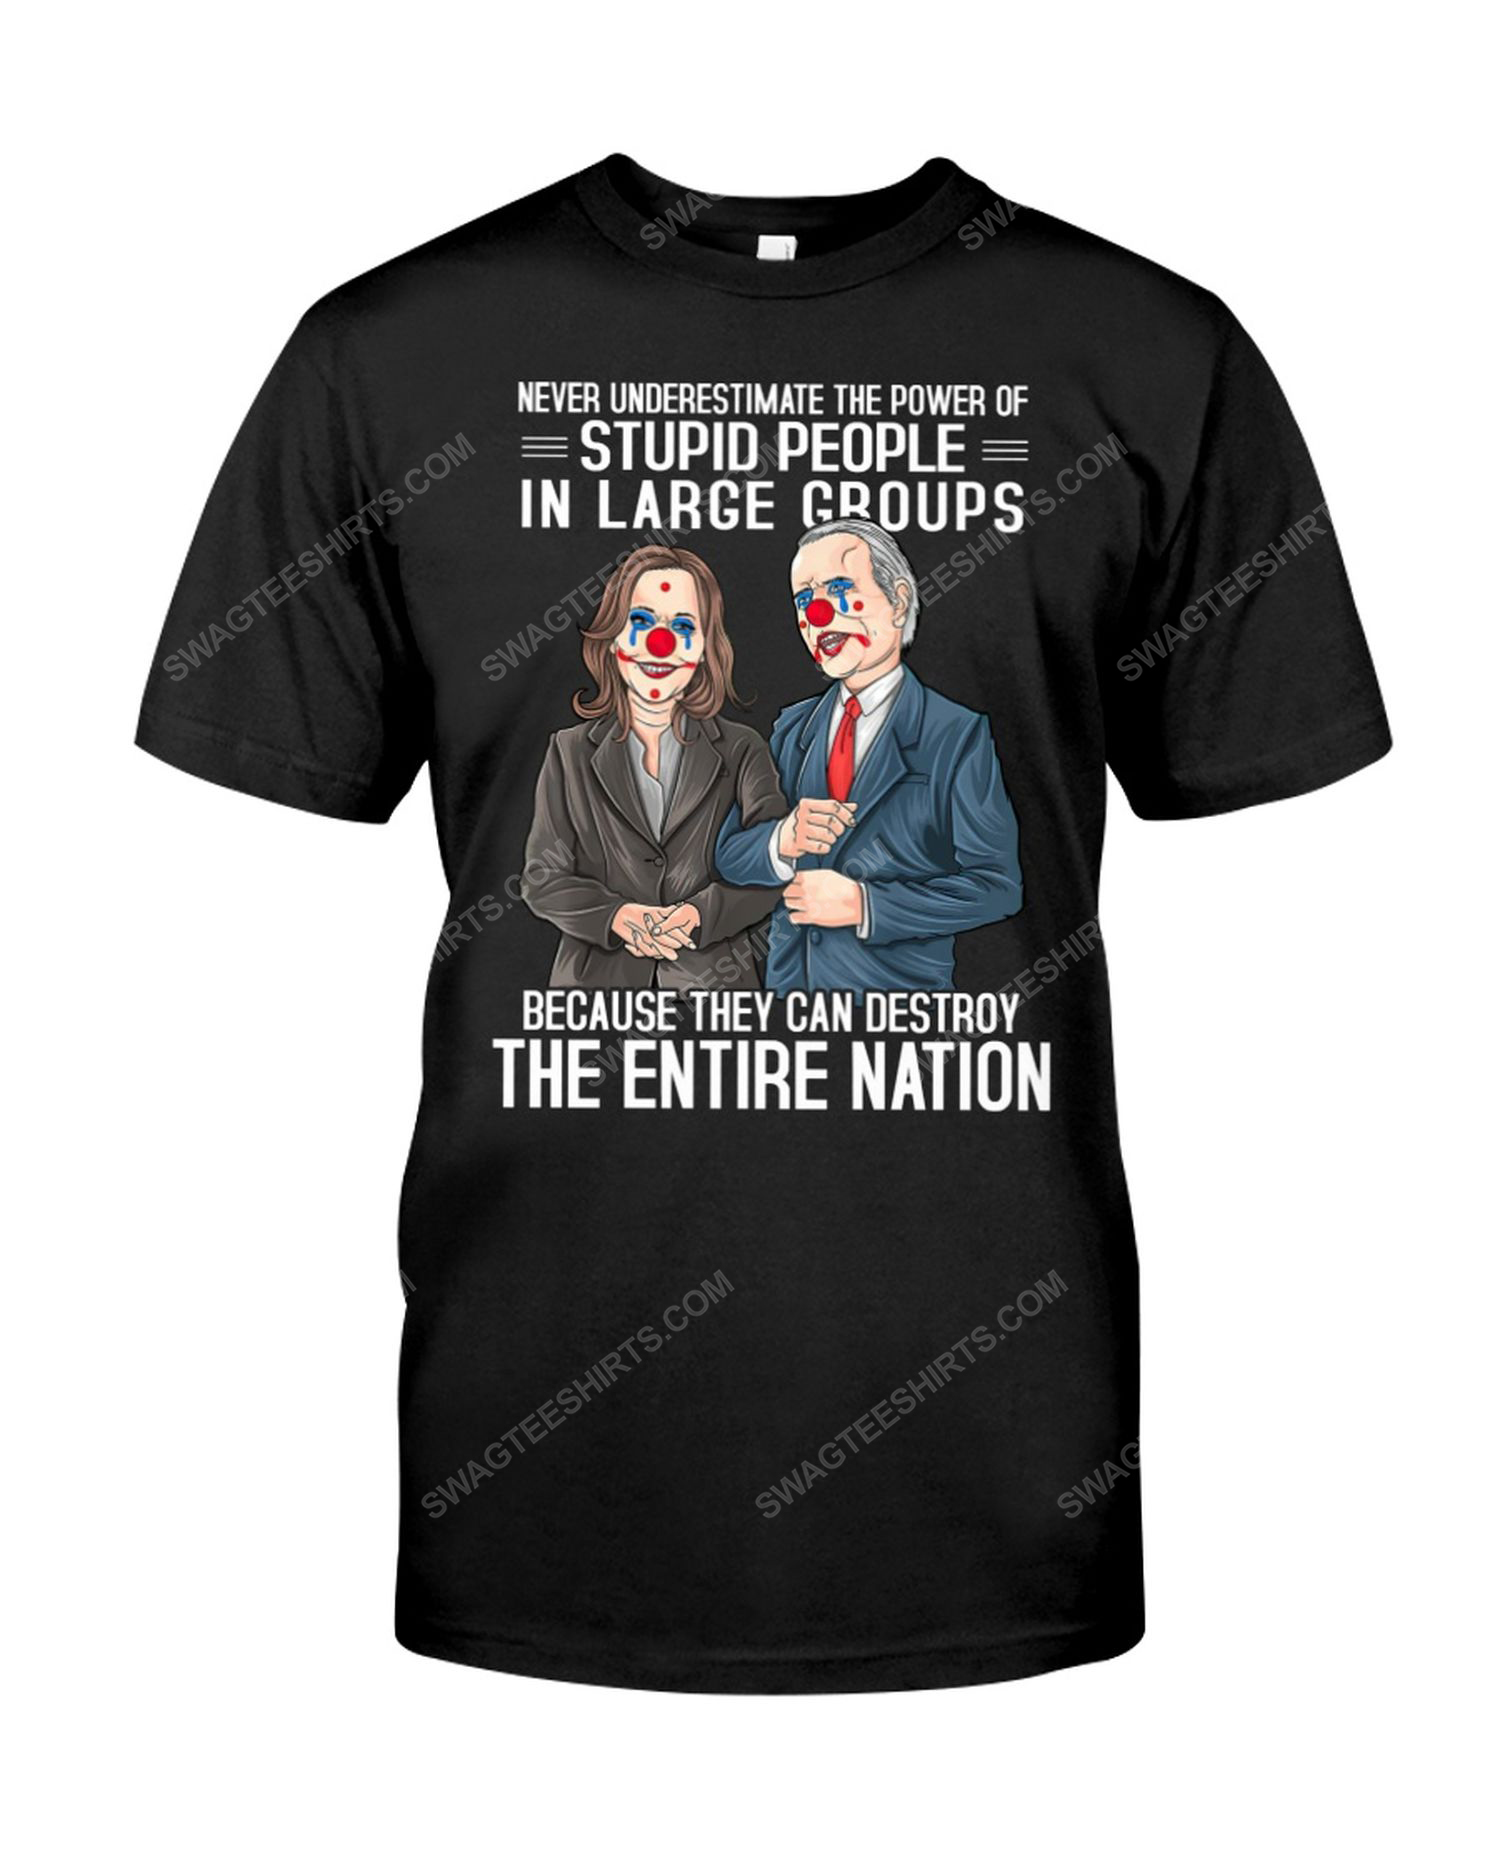 Never underestimate the power of stupid people in large groups clown face political tshirt